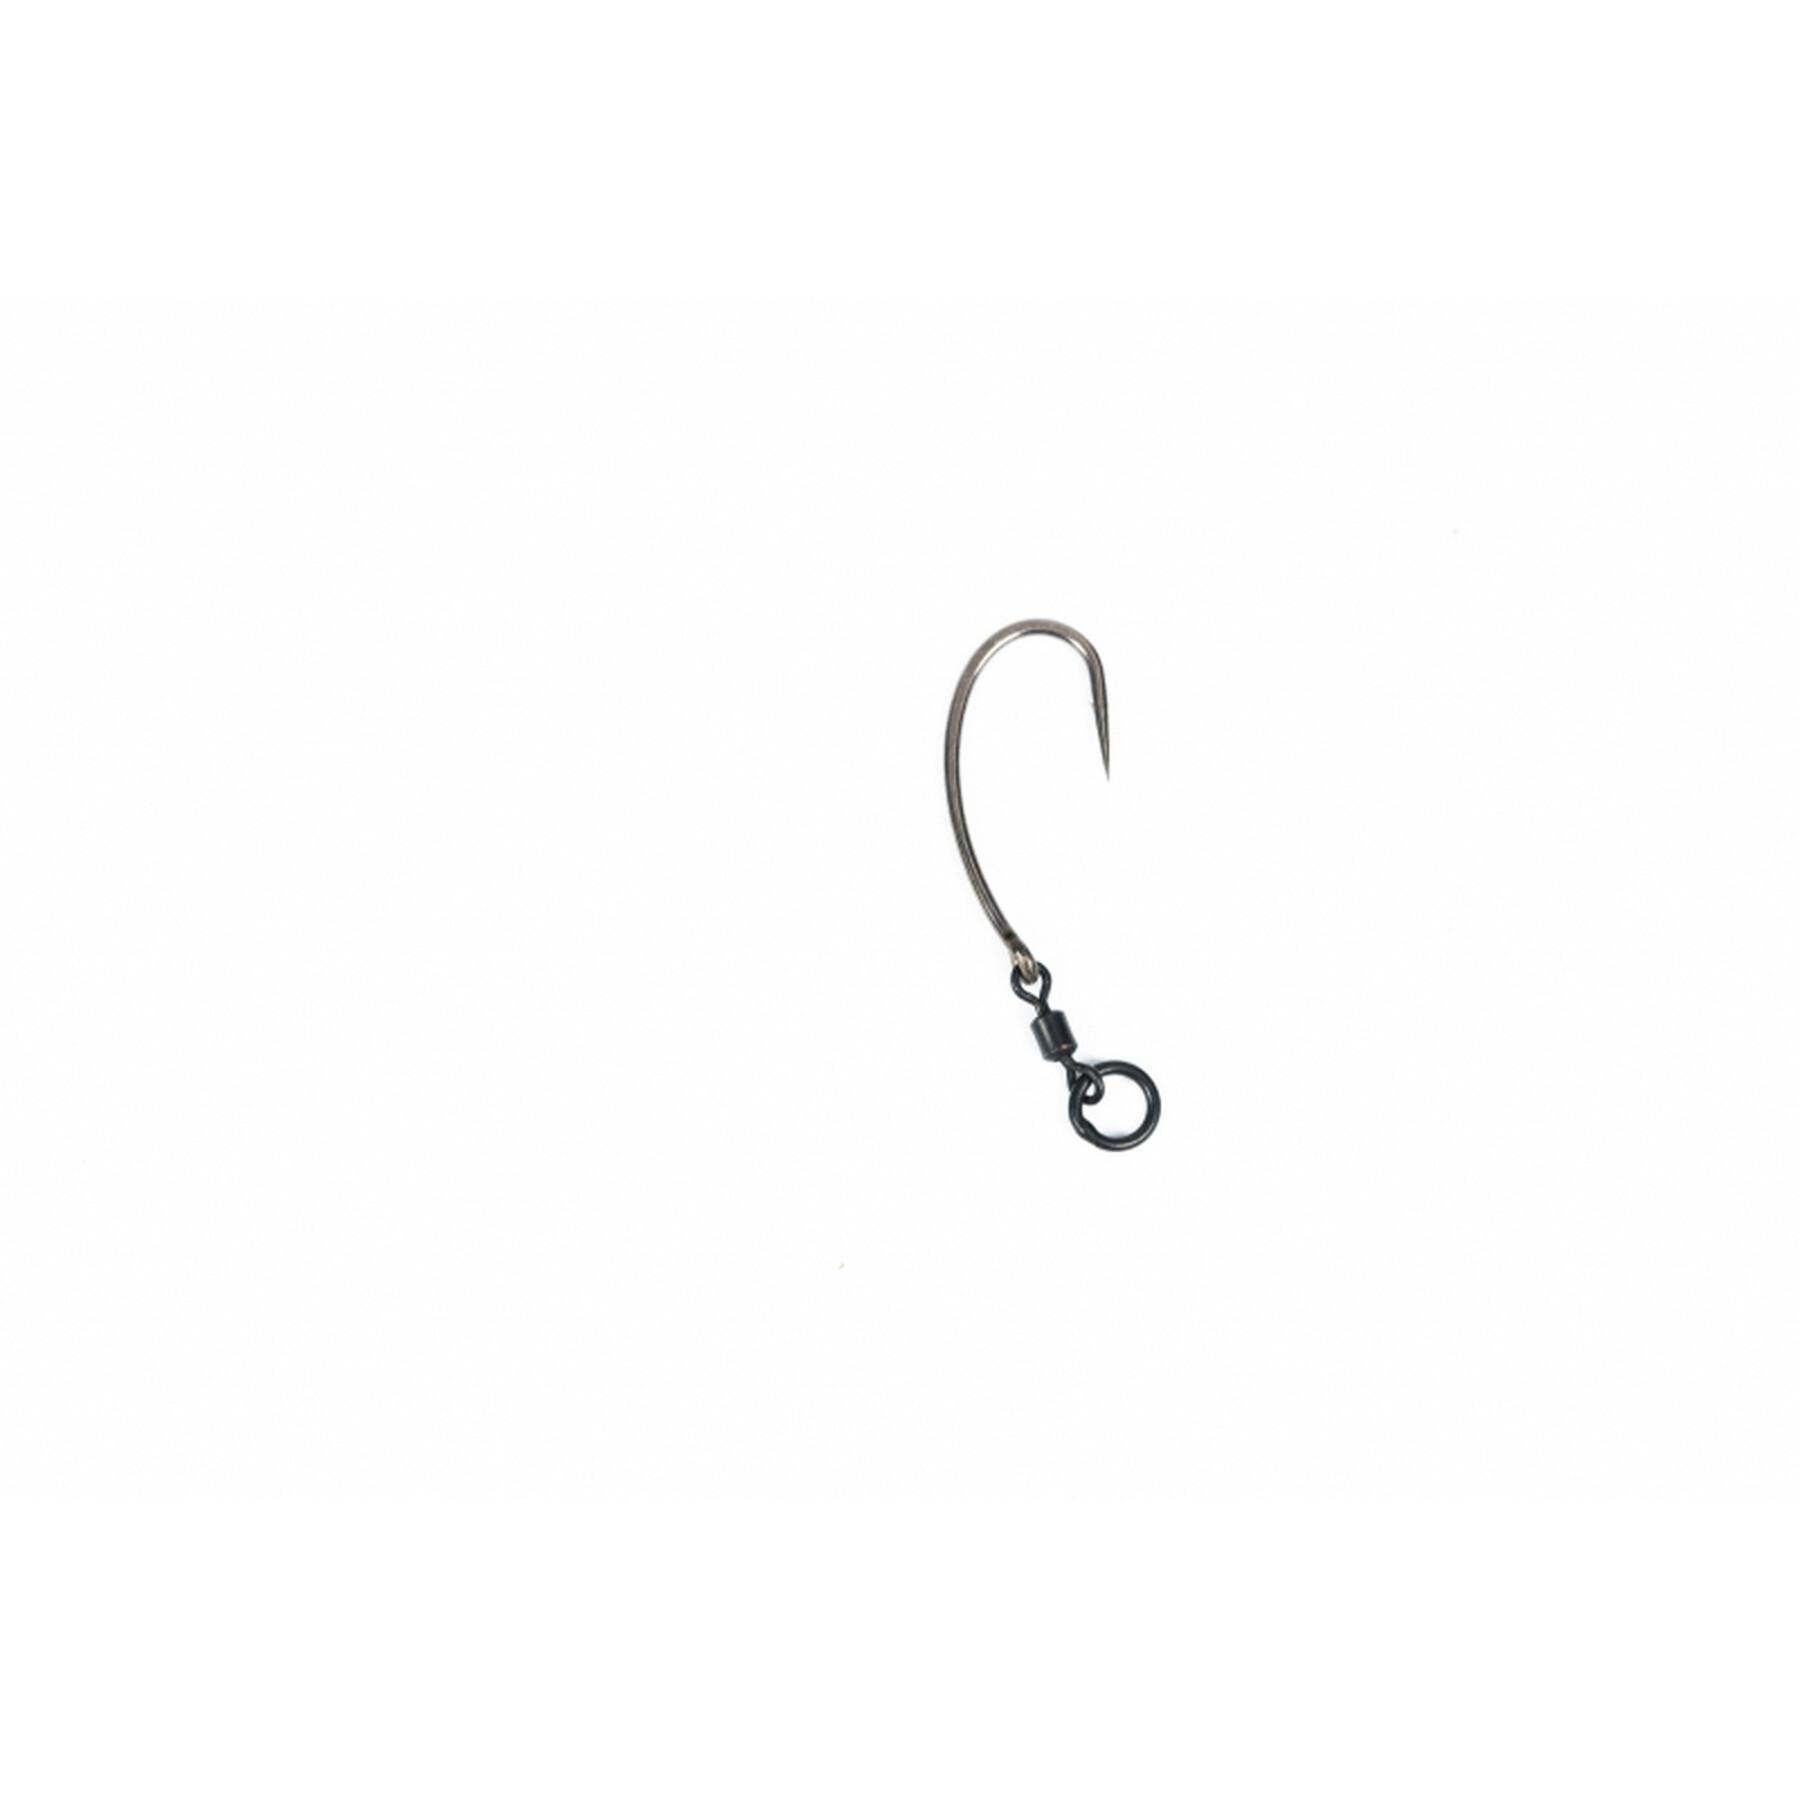 Hameçon Pinpoint Fang Gyro taille 6 Micro Barbed